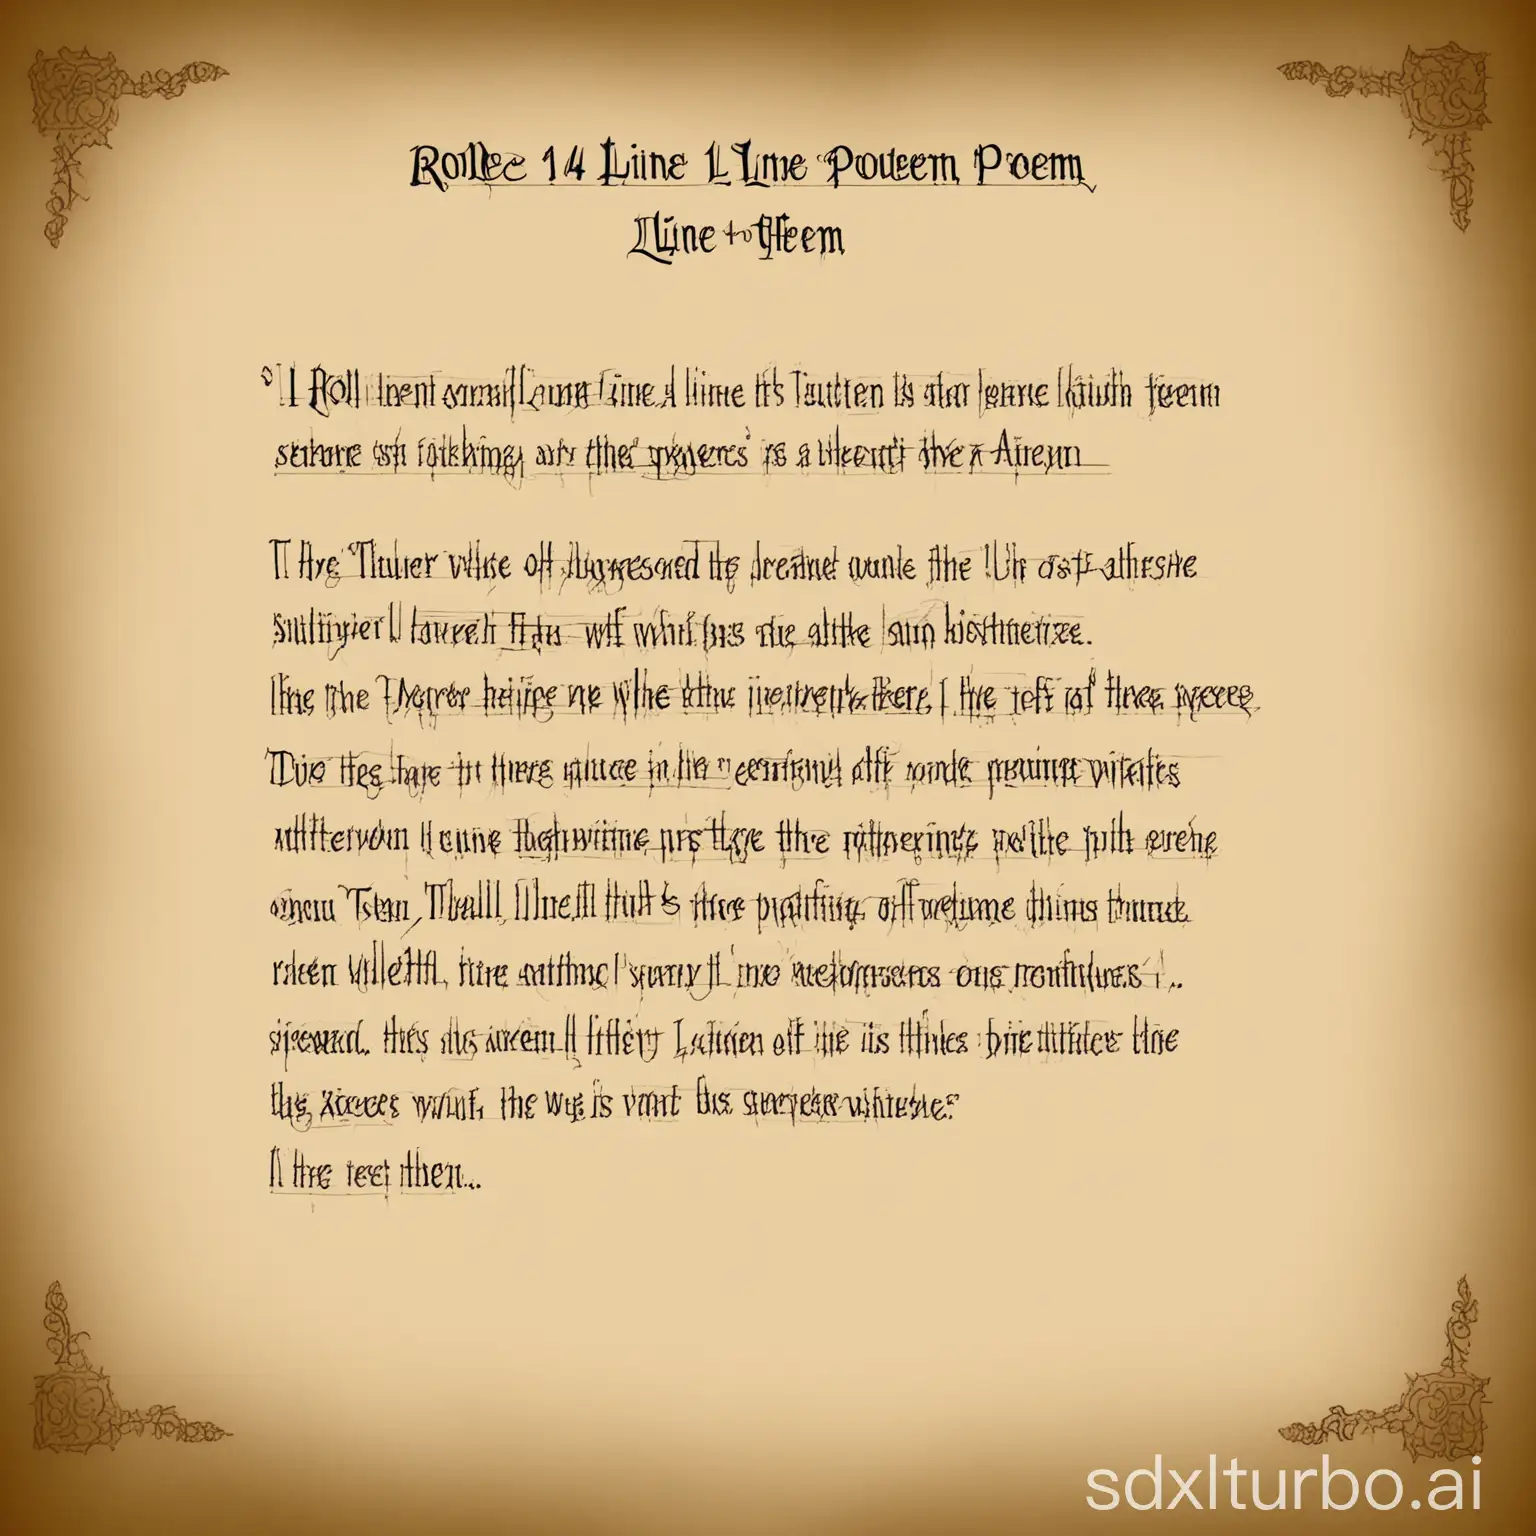 Poetic-Reflections-Role-of-a-Fourteen-Line-Poem